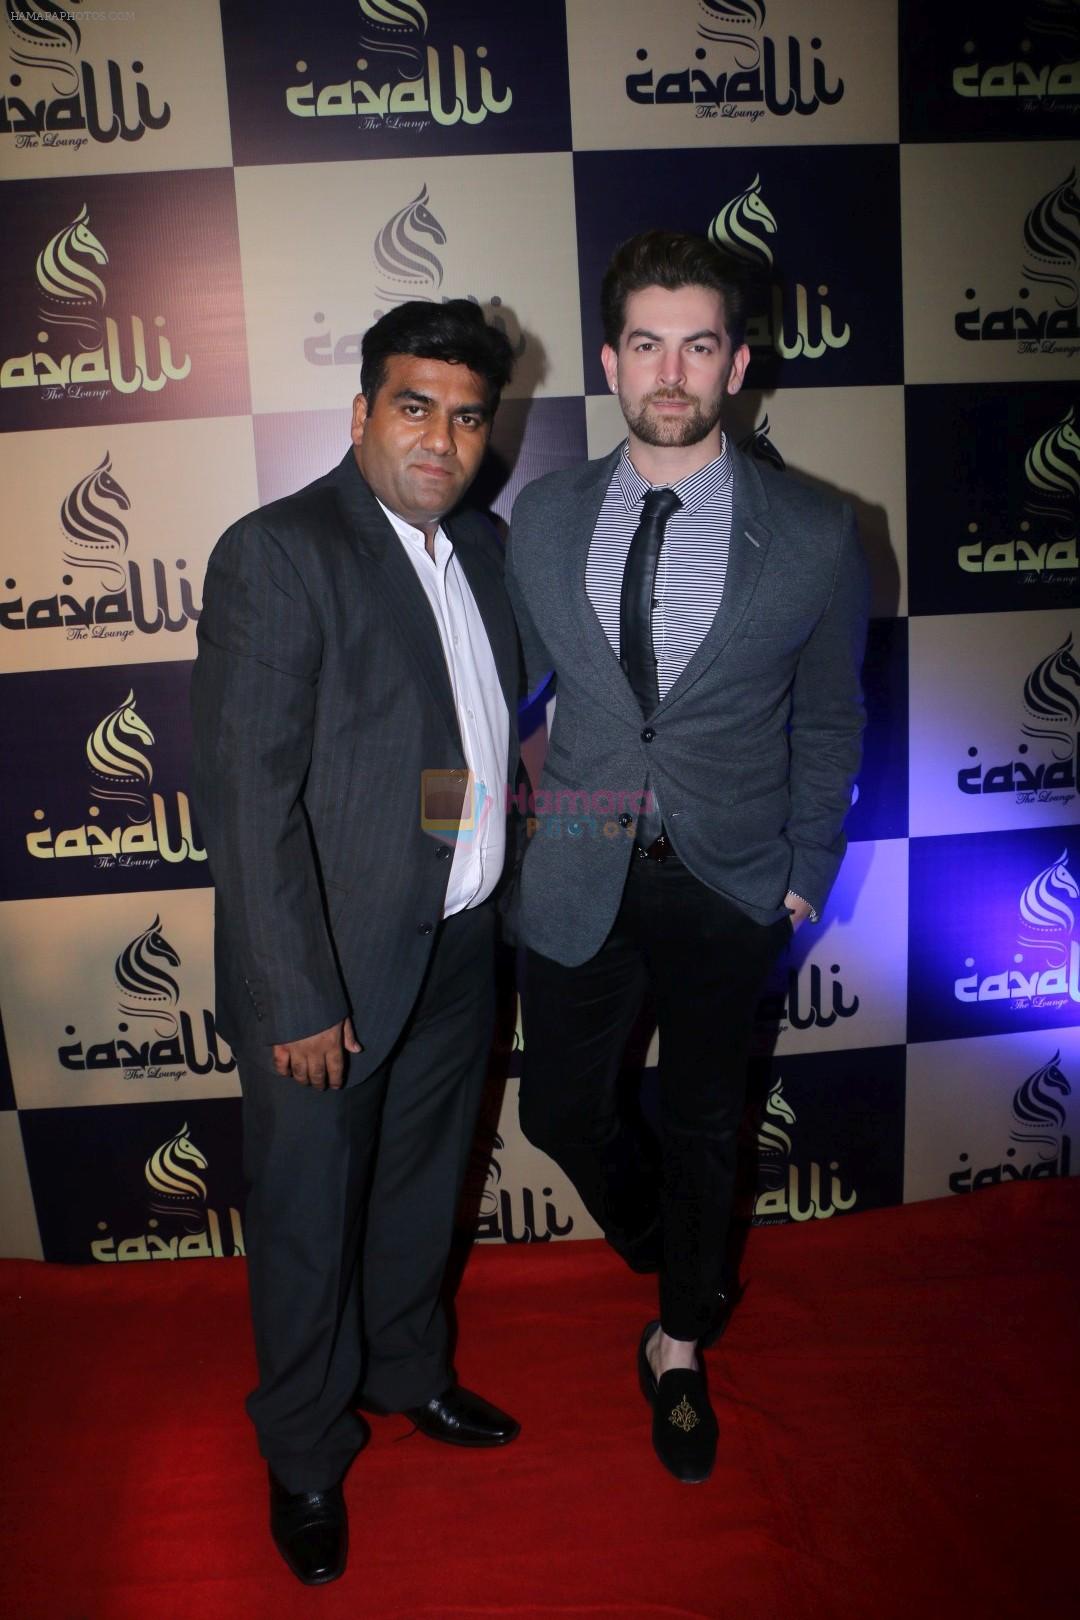 Neil Nitin Mukesh at the Launch Of Cavali-The Lounge on 24th March 2017